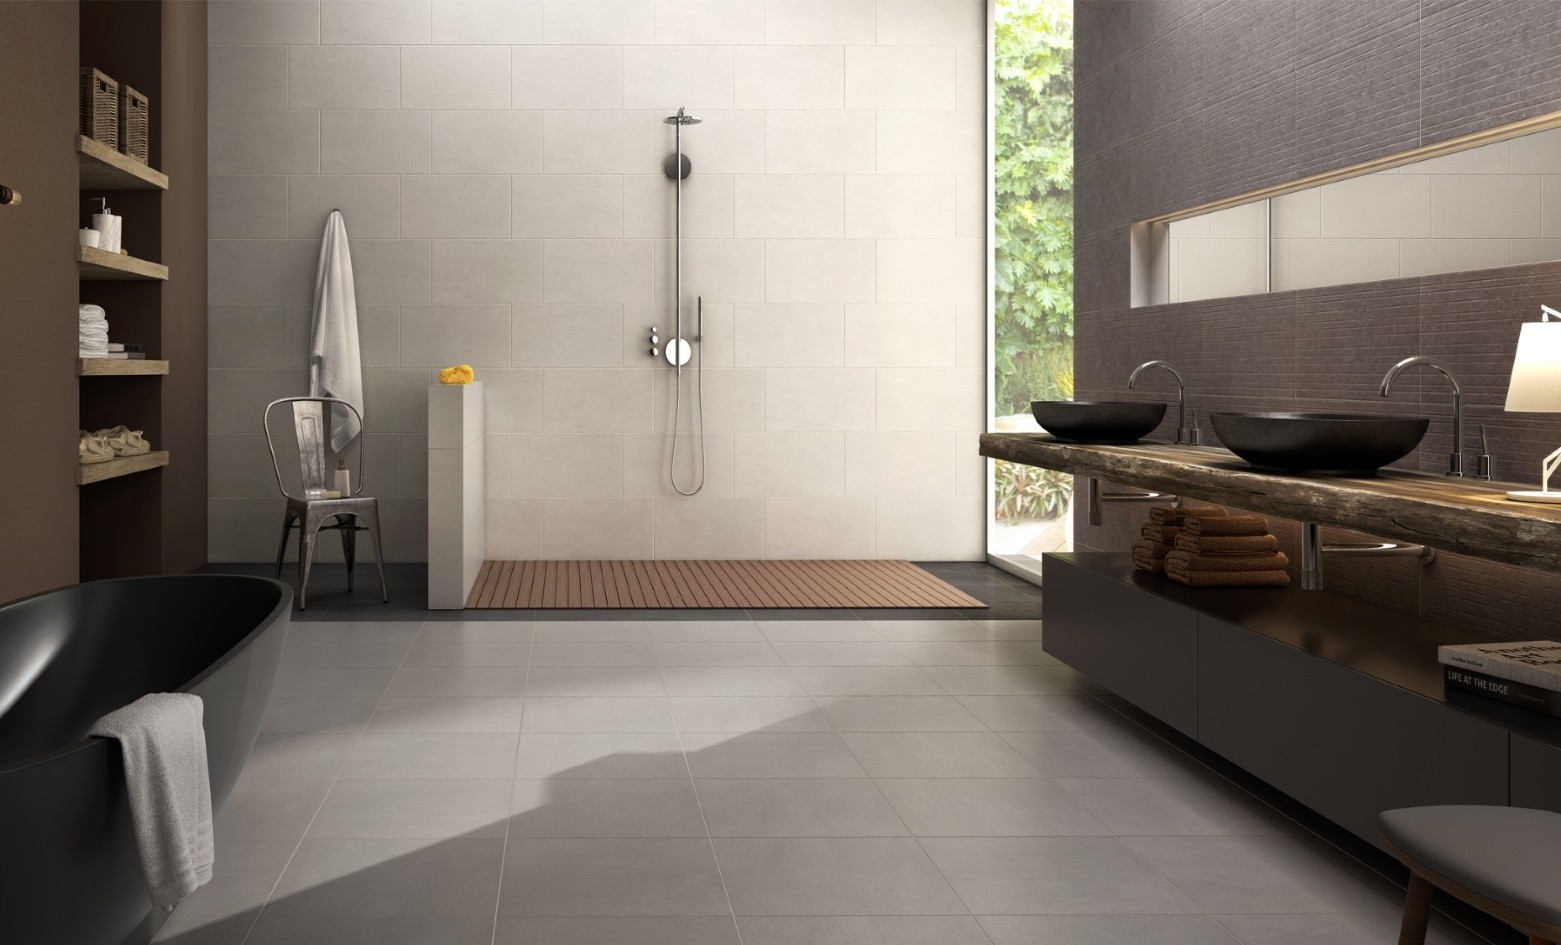 <span  class="uc_style_uc_tiles_grid_image_elementor_uc_items_attribute_title" style="color:#ffffff;">mauna-grey-45x45-beige-30x60-decor-anthracite-anthracite-45x45_0504055119</span>